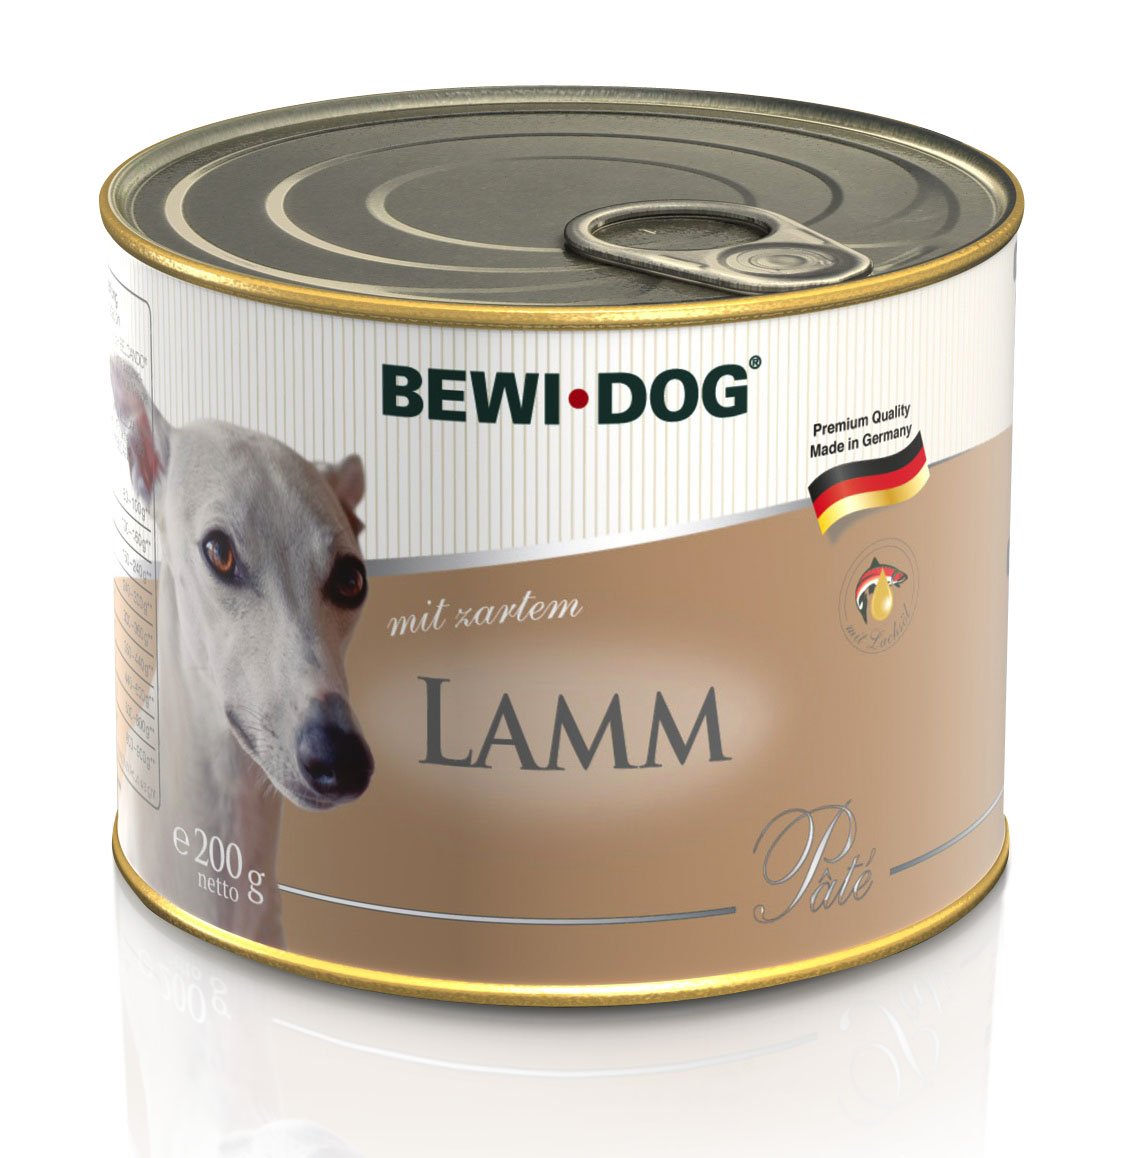 200 grams of canned lamb